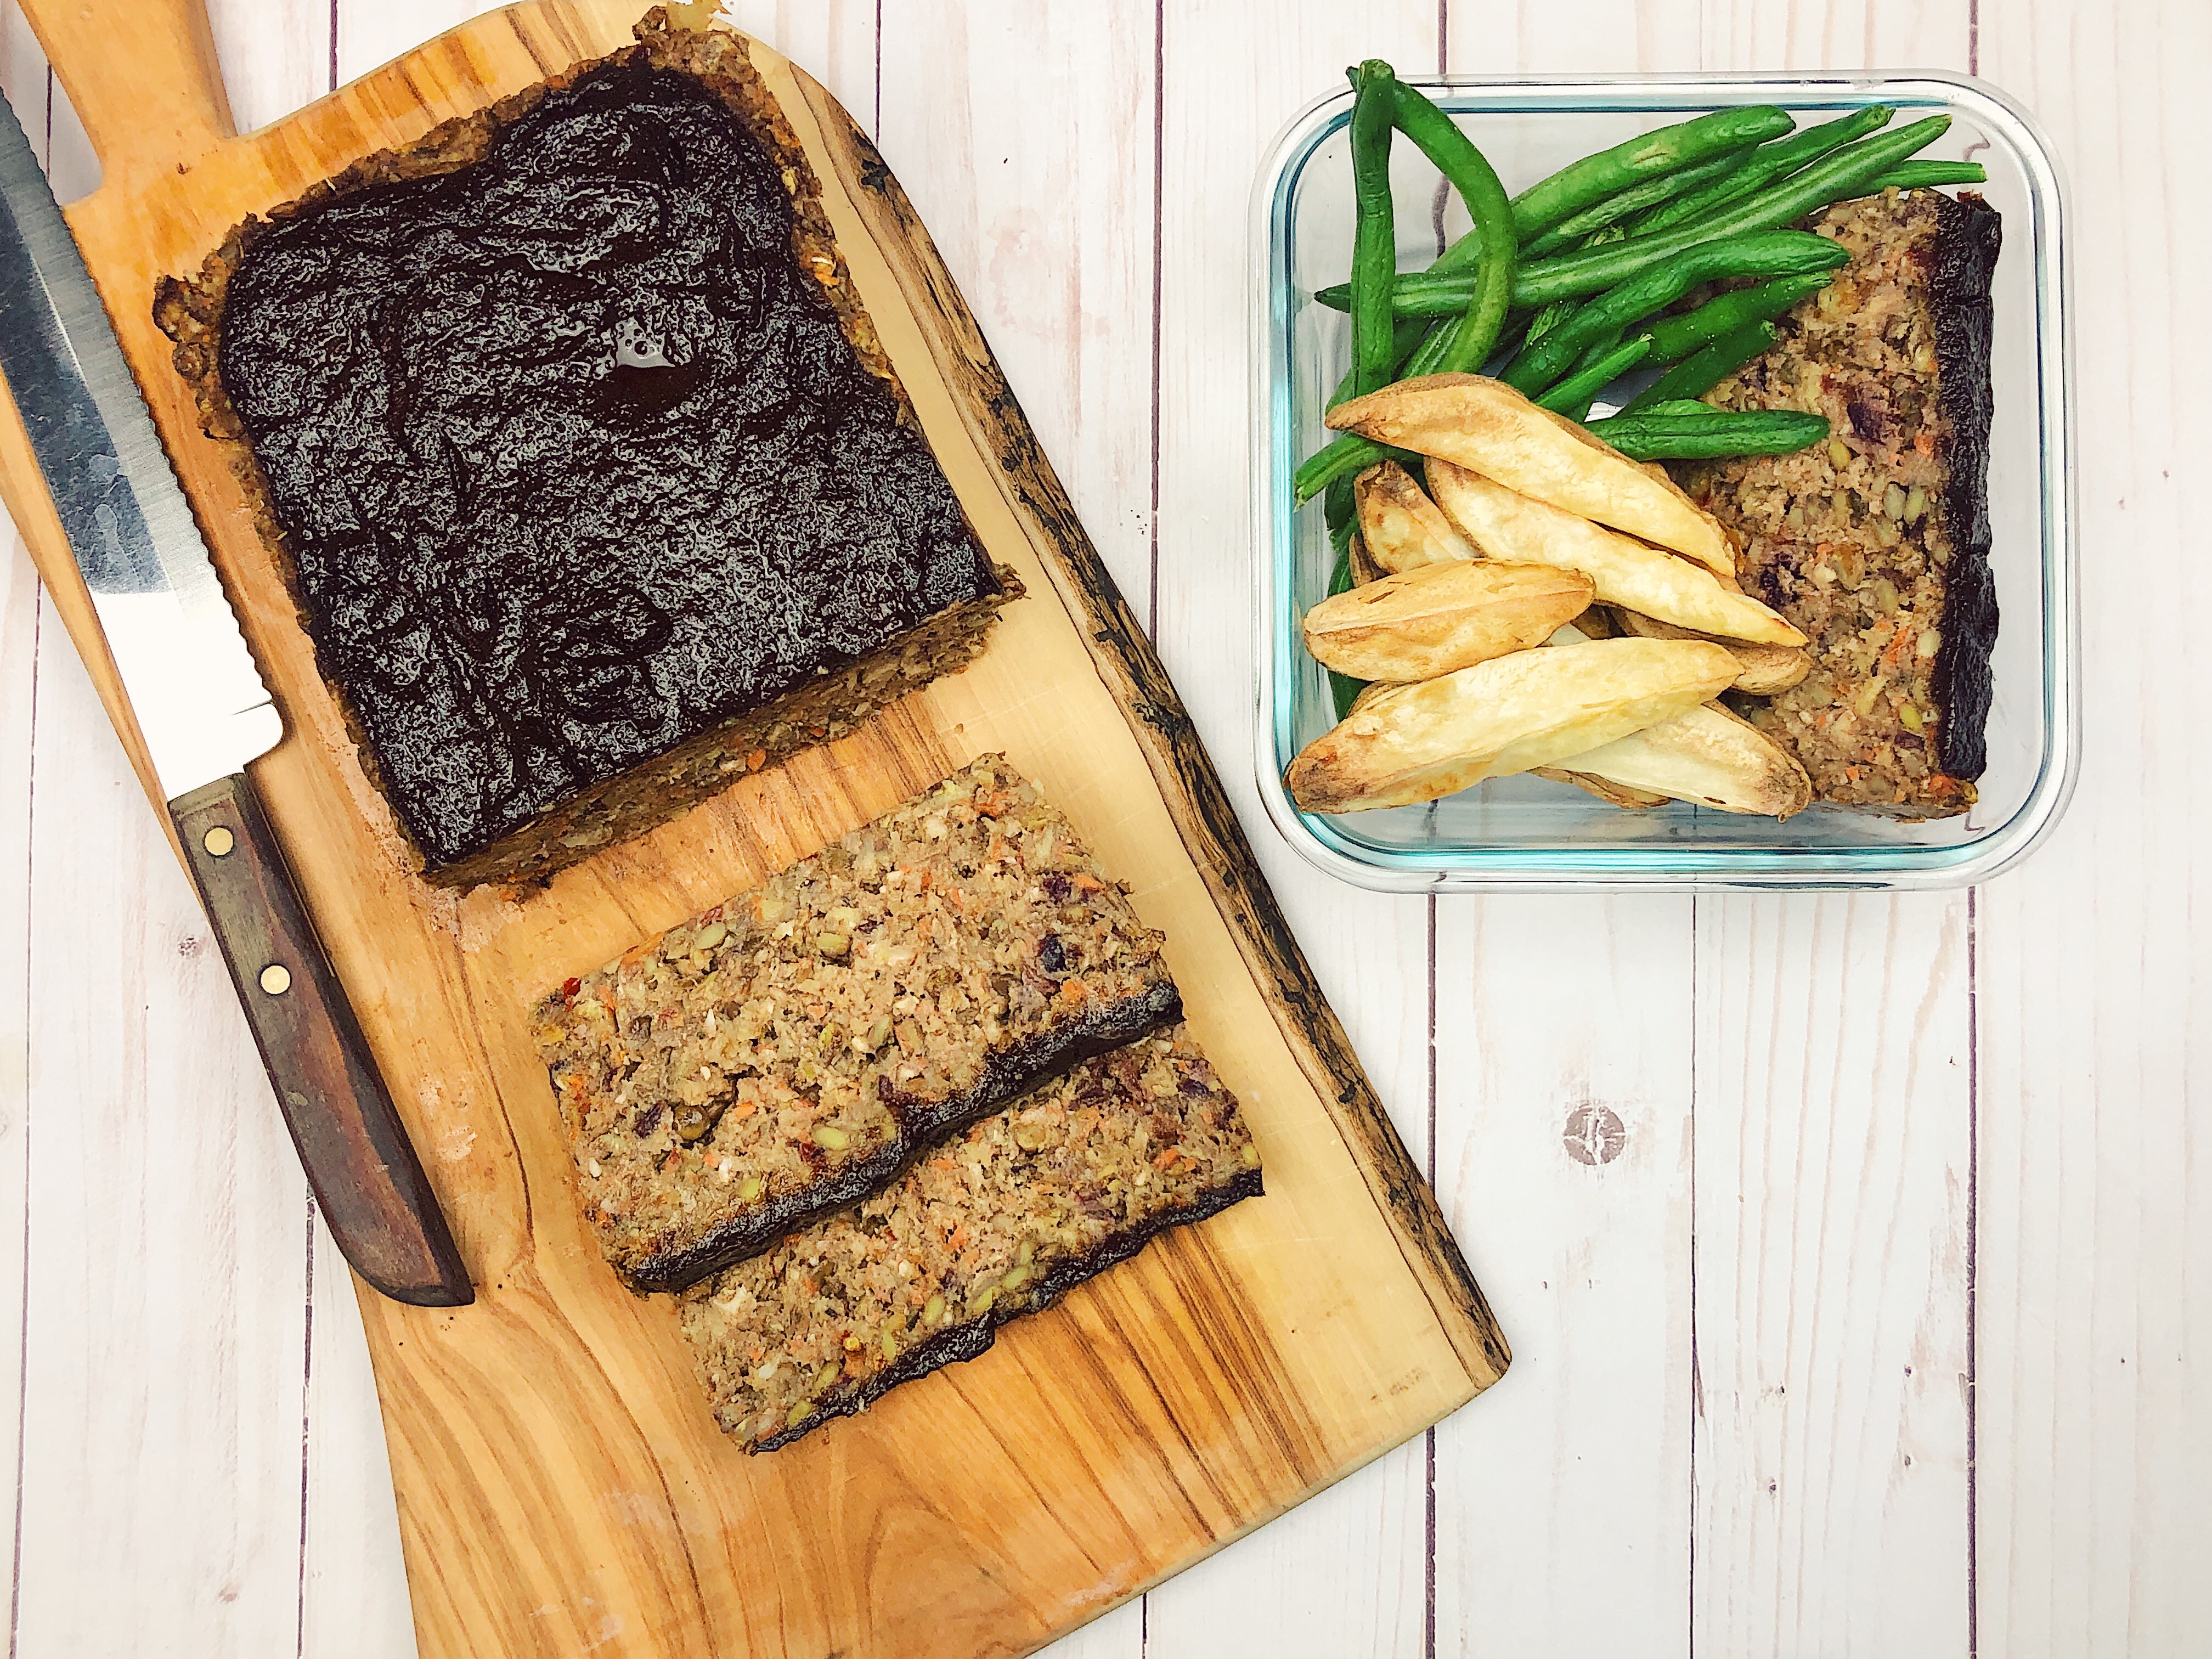 Walnut Lentil Loaf with Green Beans and Potato Wedges